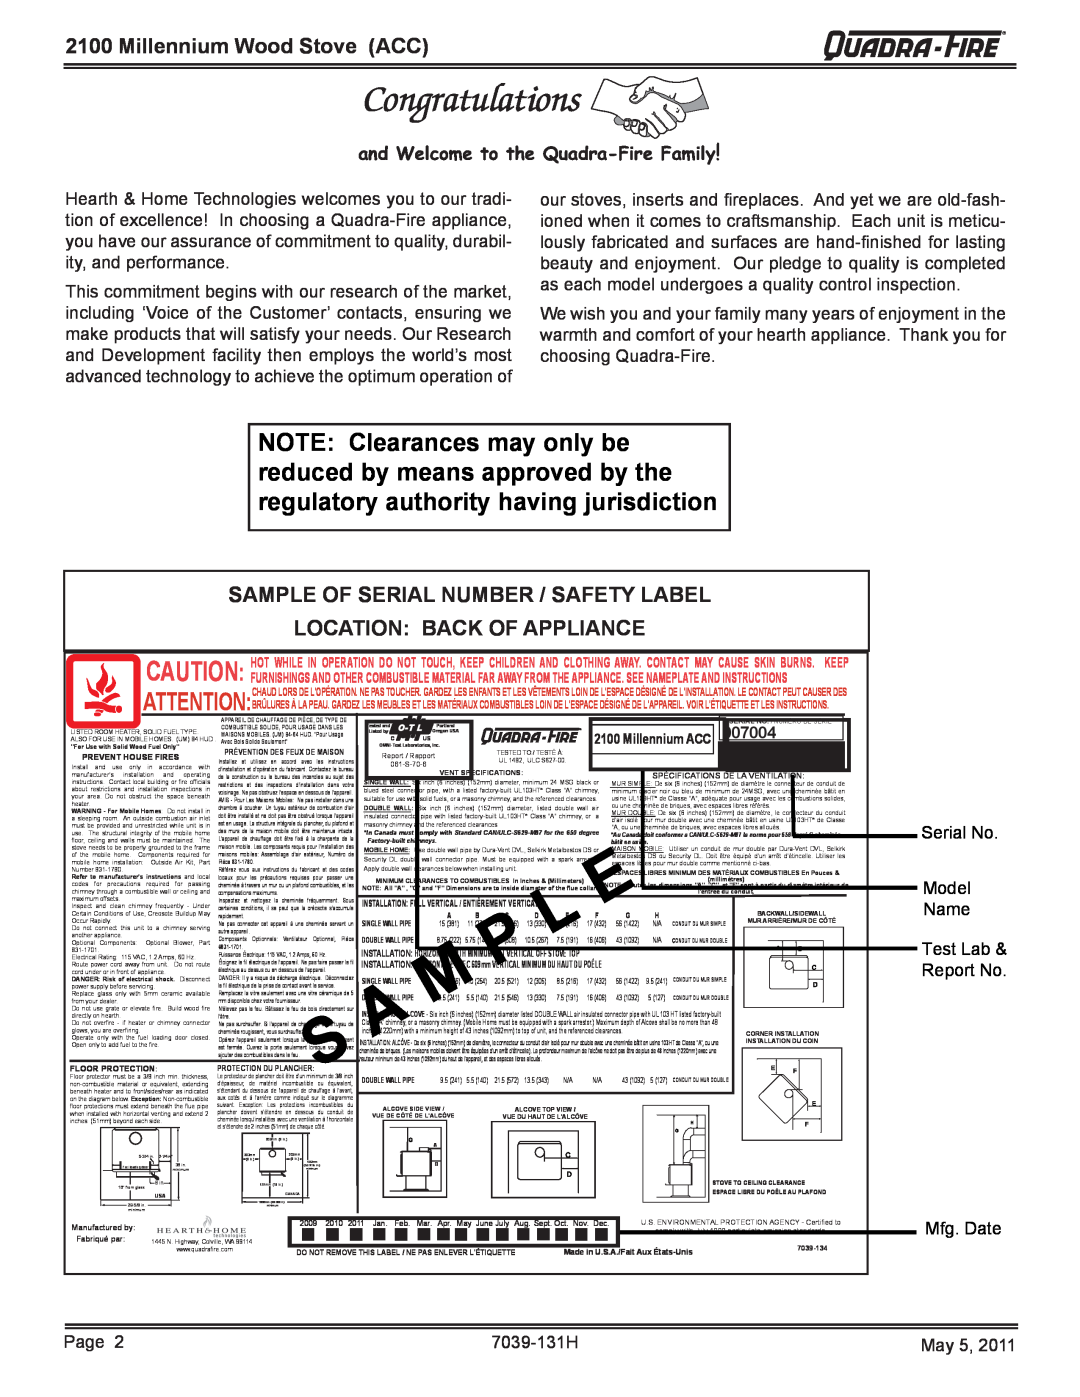 Quadra-Fire 21M-ACC Millennium Wood Stove ACC, Sample Of Serial Number / Safety Label, Location Back Of Appliance 